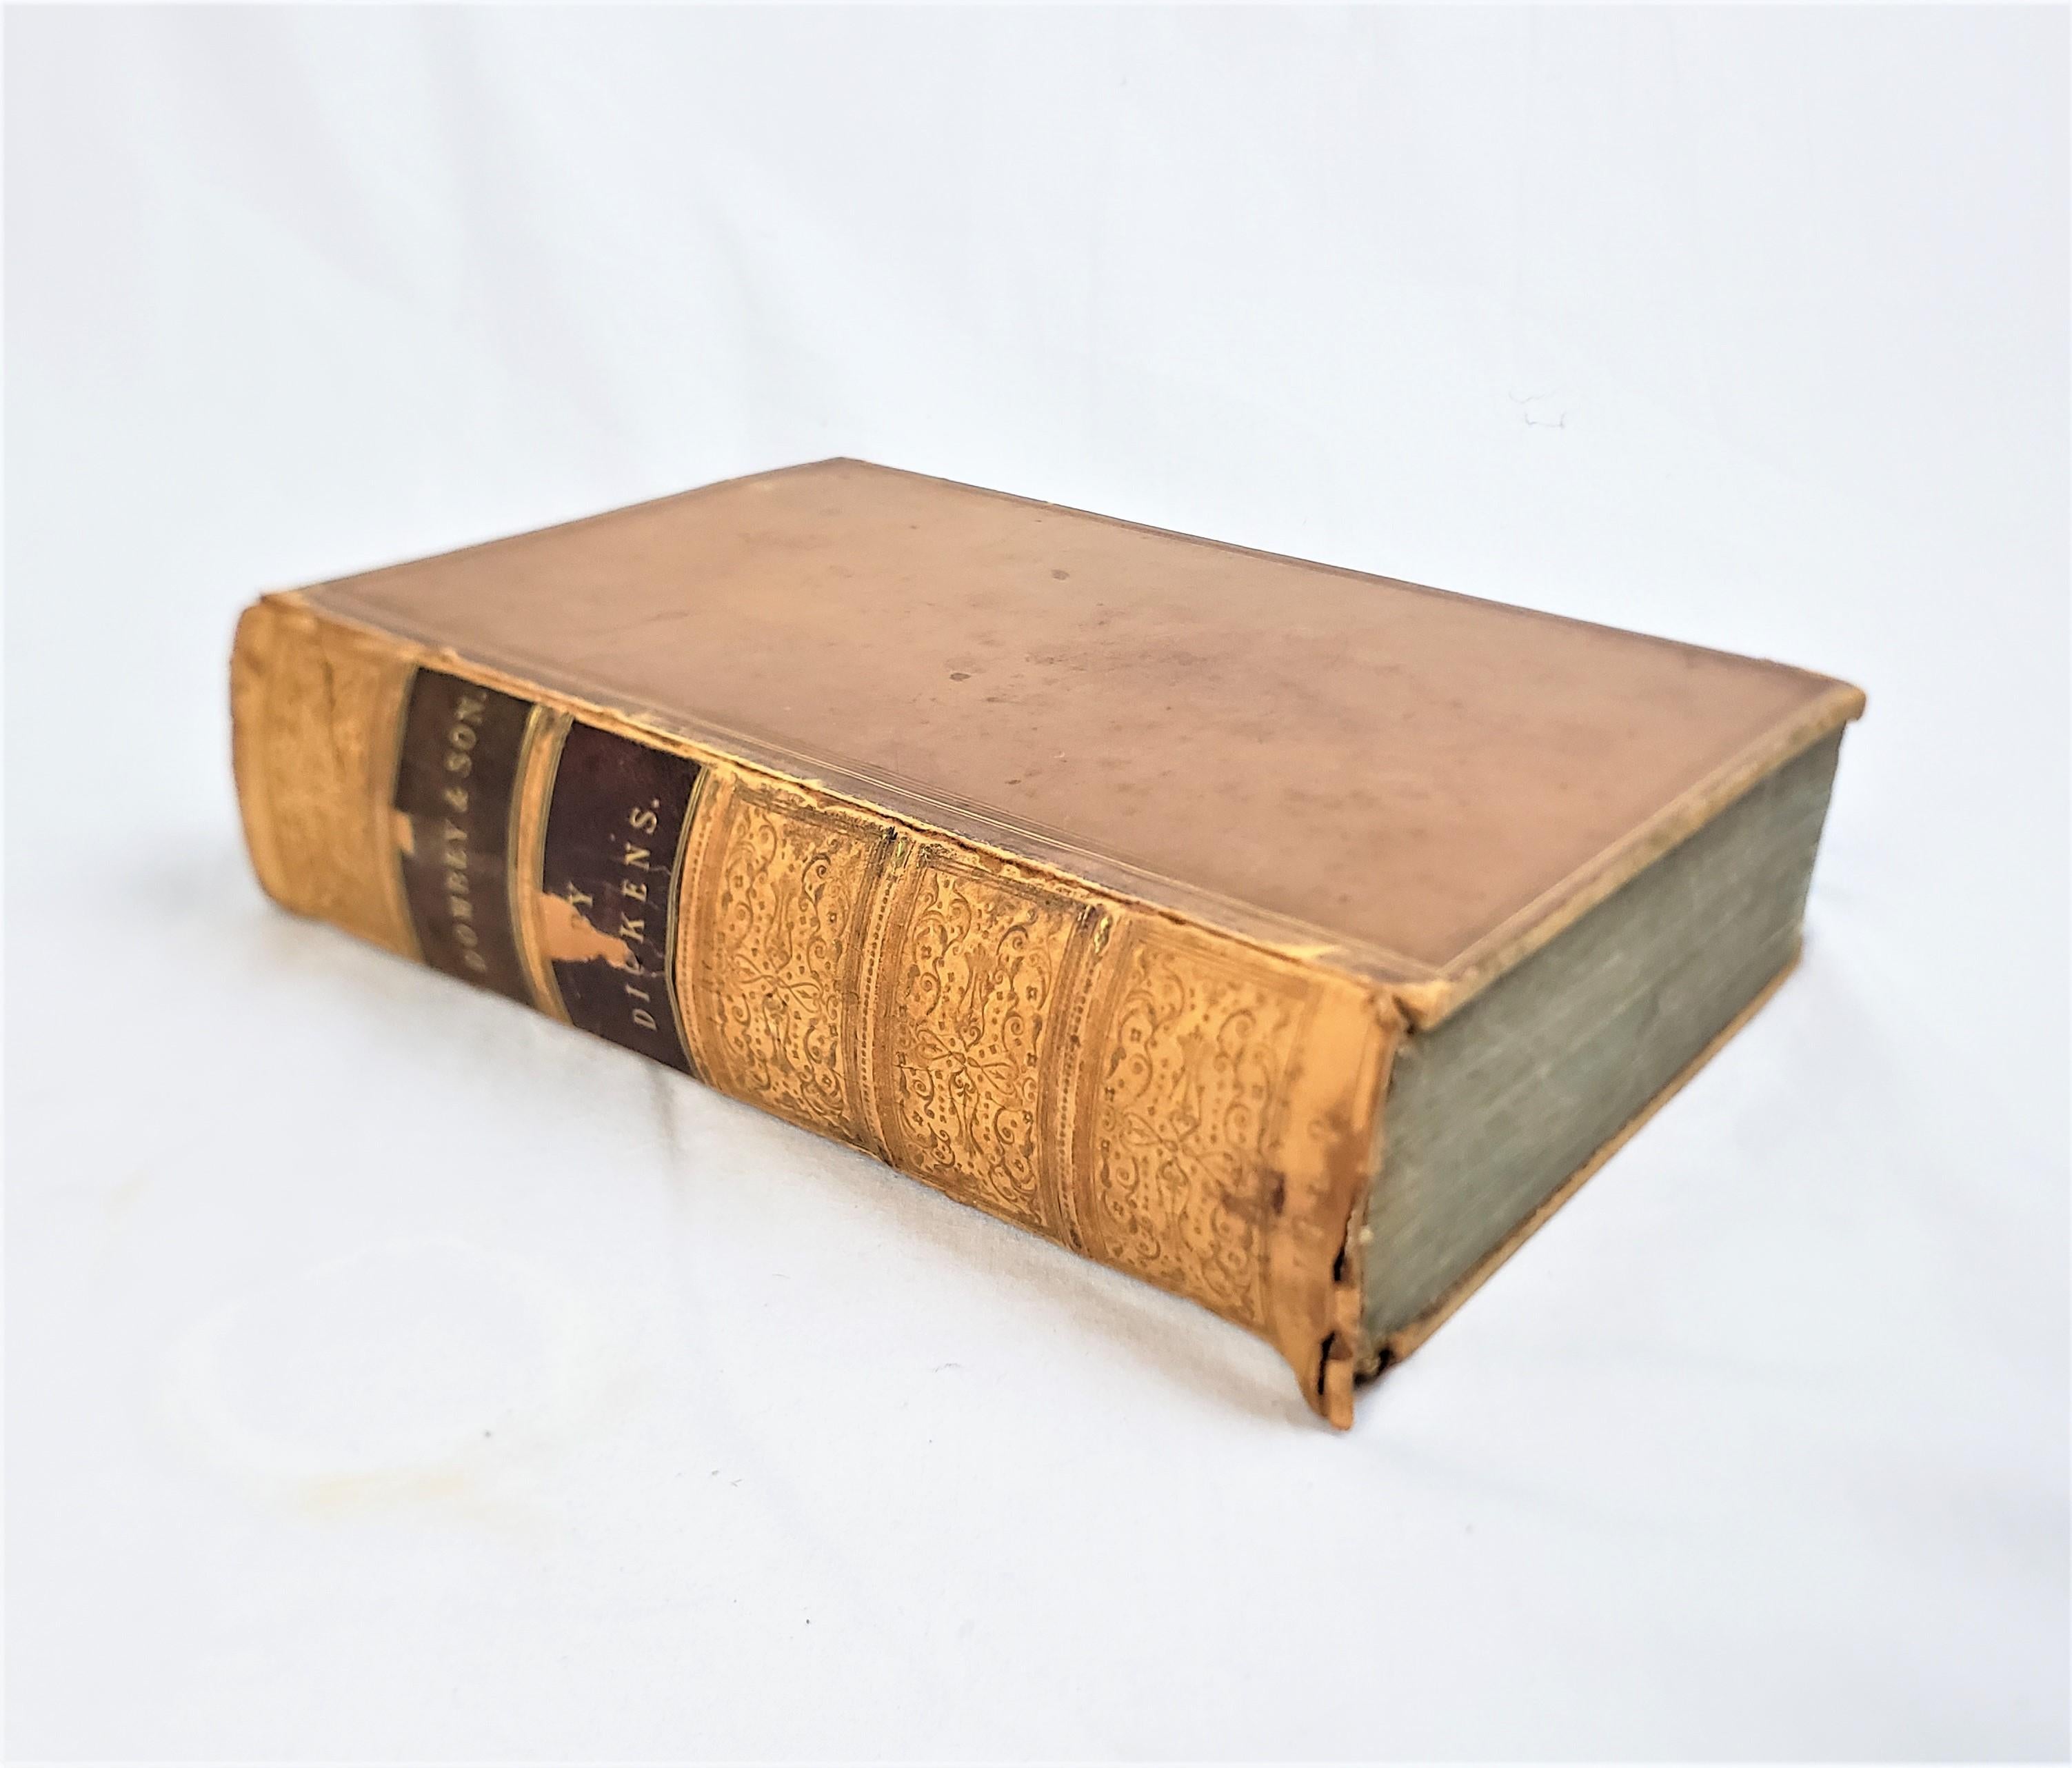 This antique 1st Edition book titled Dombey & Son was authored by Charles Dickens and published by Bradbury & Evans, Whitefriars of England in 1848 in the period Victorian style with etchings by Hablot Knight Browne 